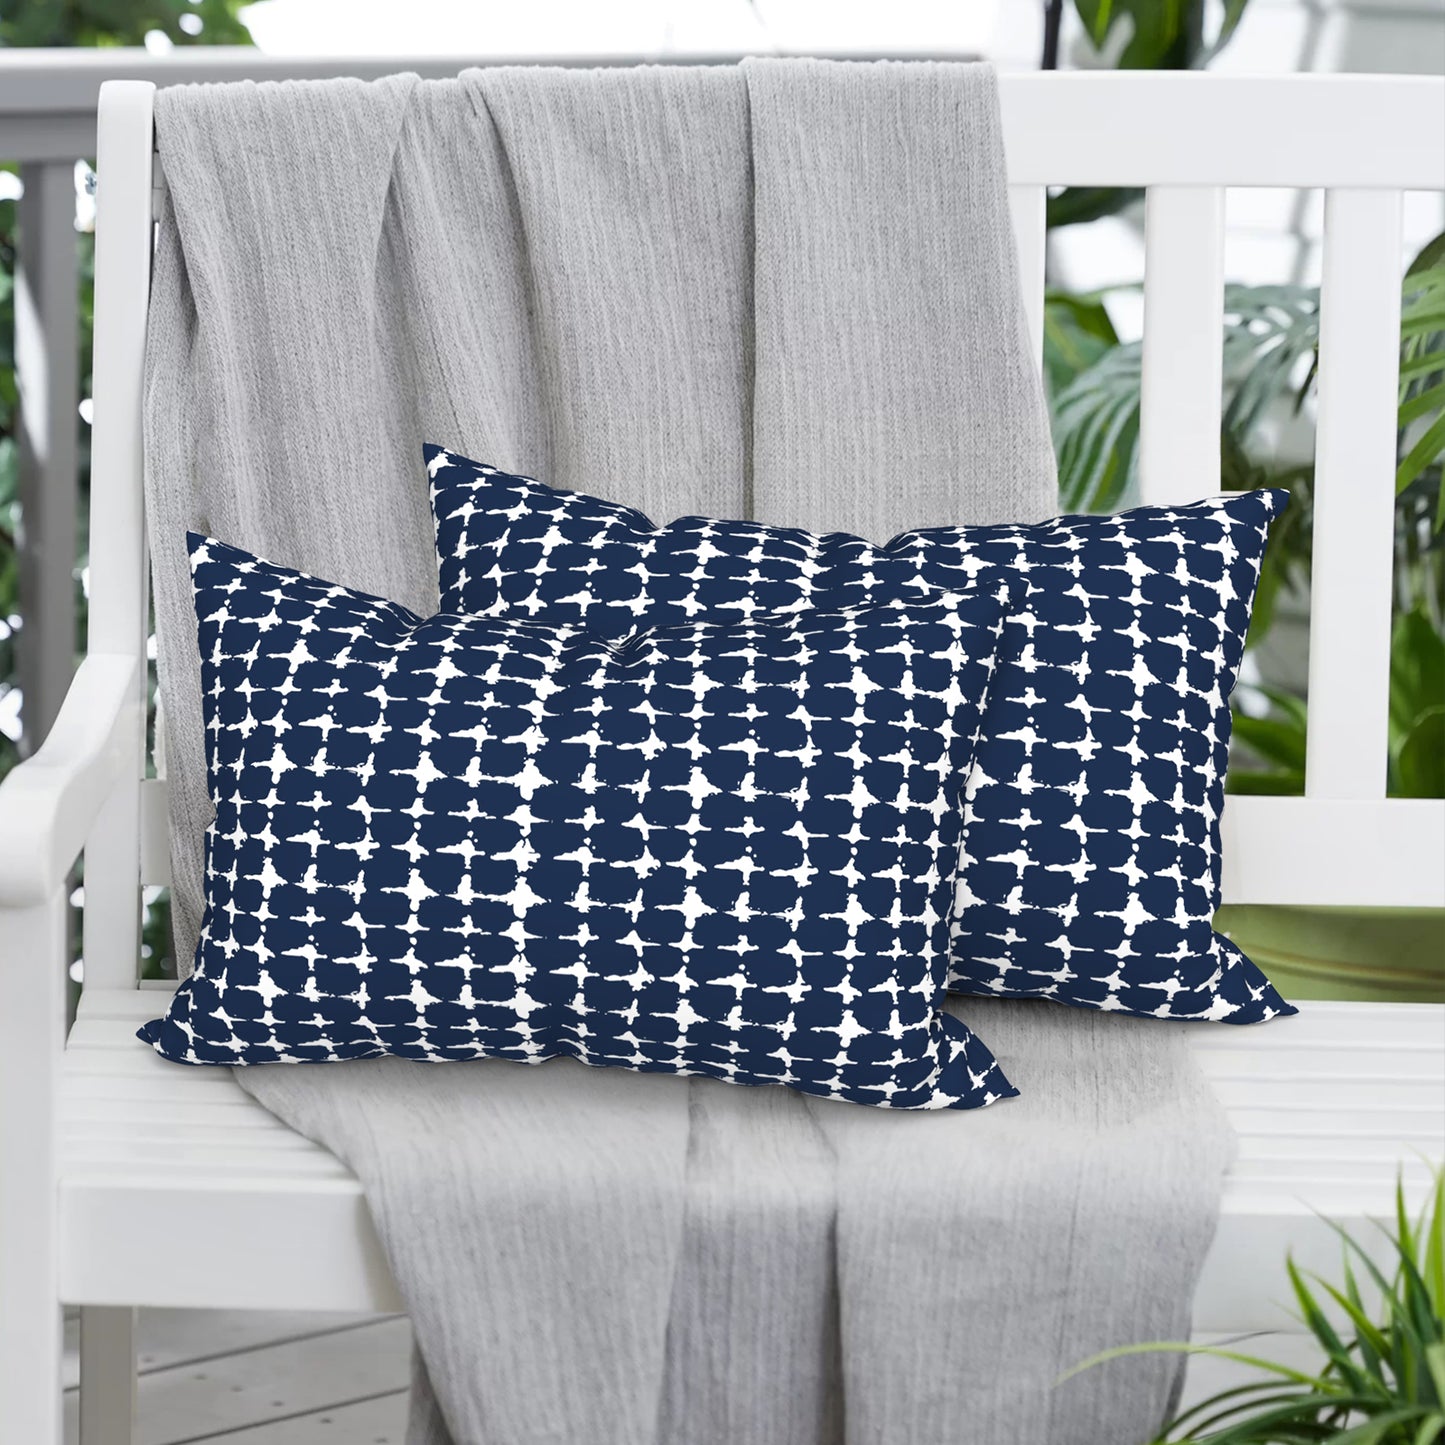 Melody Elephant Pack of 2 Outdoor Lumbar Pillow Covers, All Weather Cushion Pillow Cases 12x20 Inch, Pillowcase for Patio Couch Decoration, Tie-Dye Navy